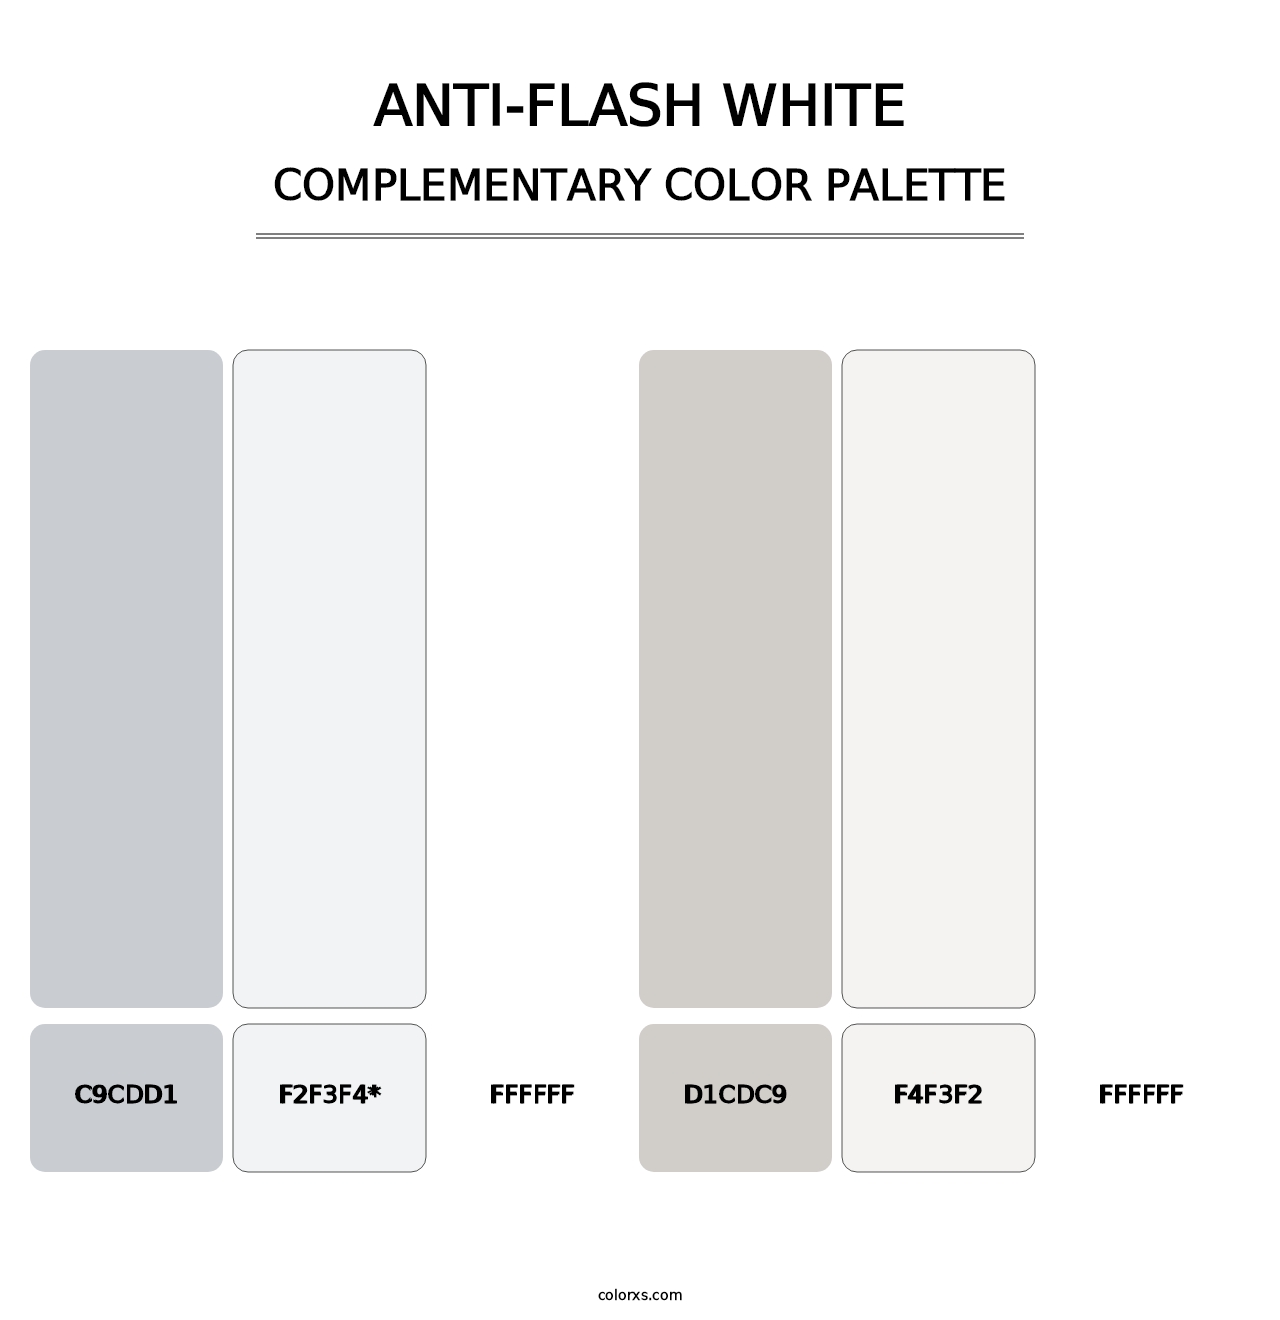 Anti-flash white - Complementary Color Palette